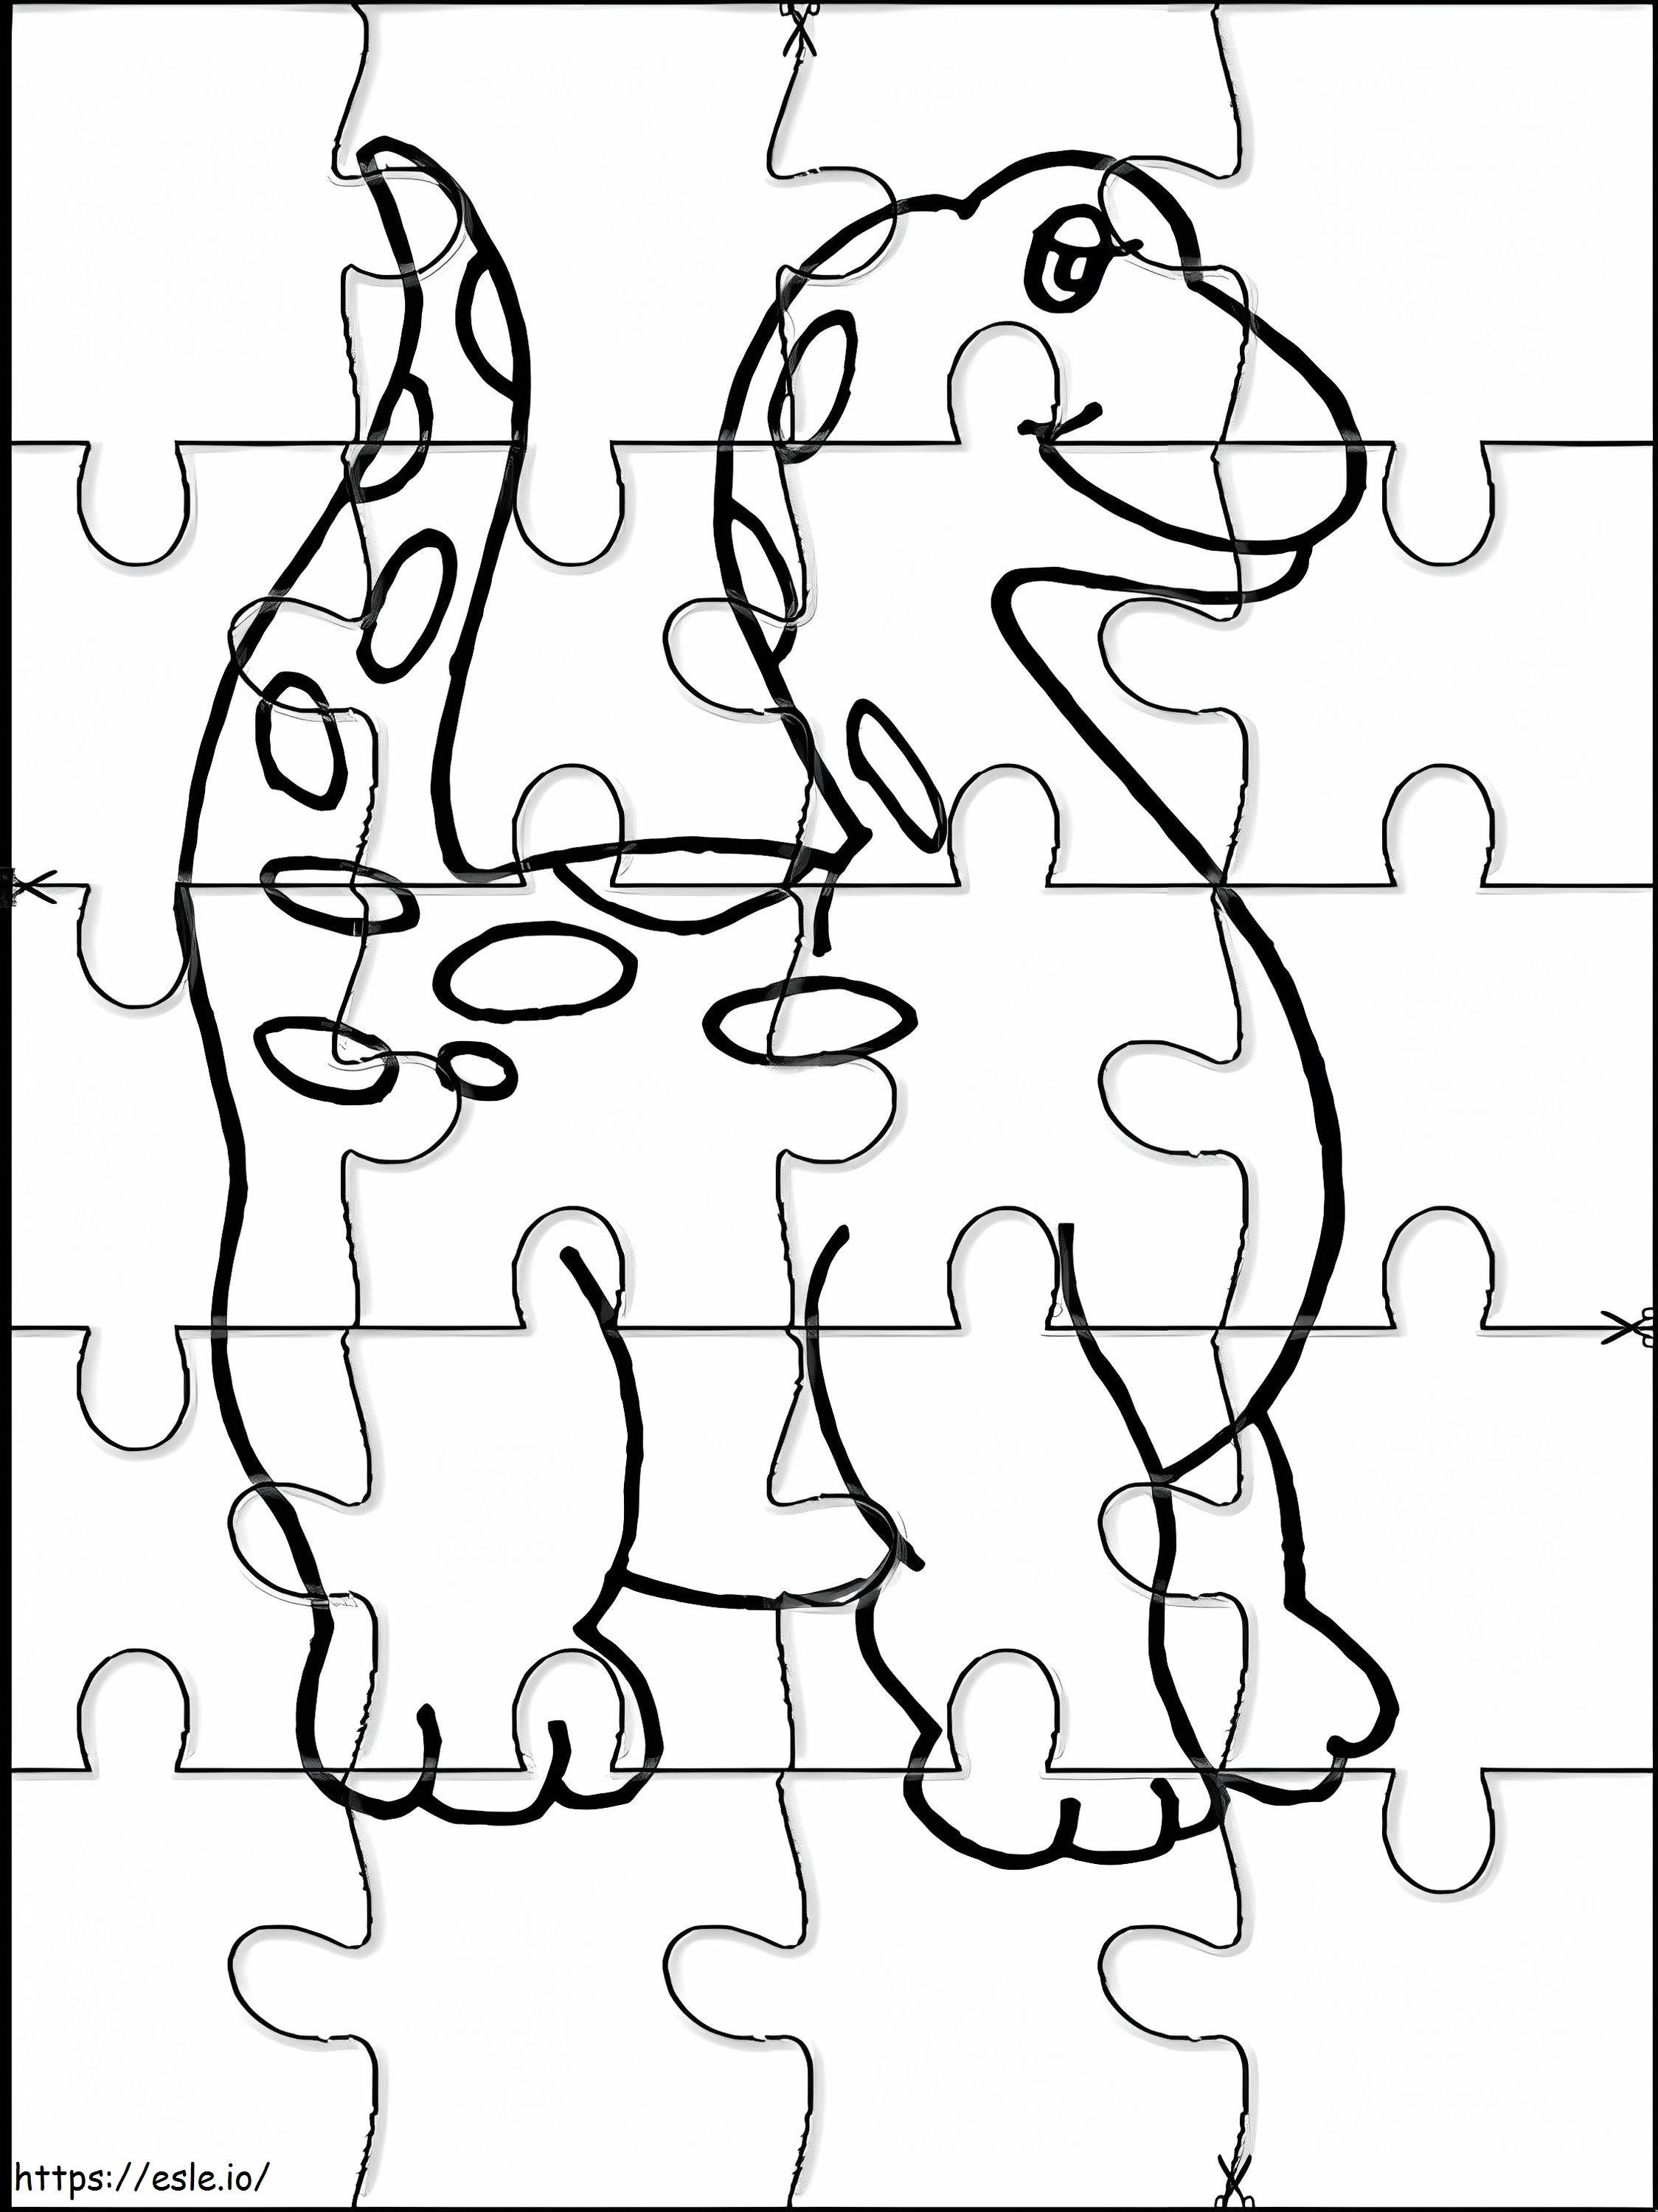 Dinosaur Jigsaw Puzzle coloring page